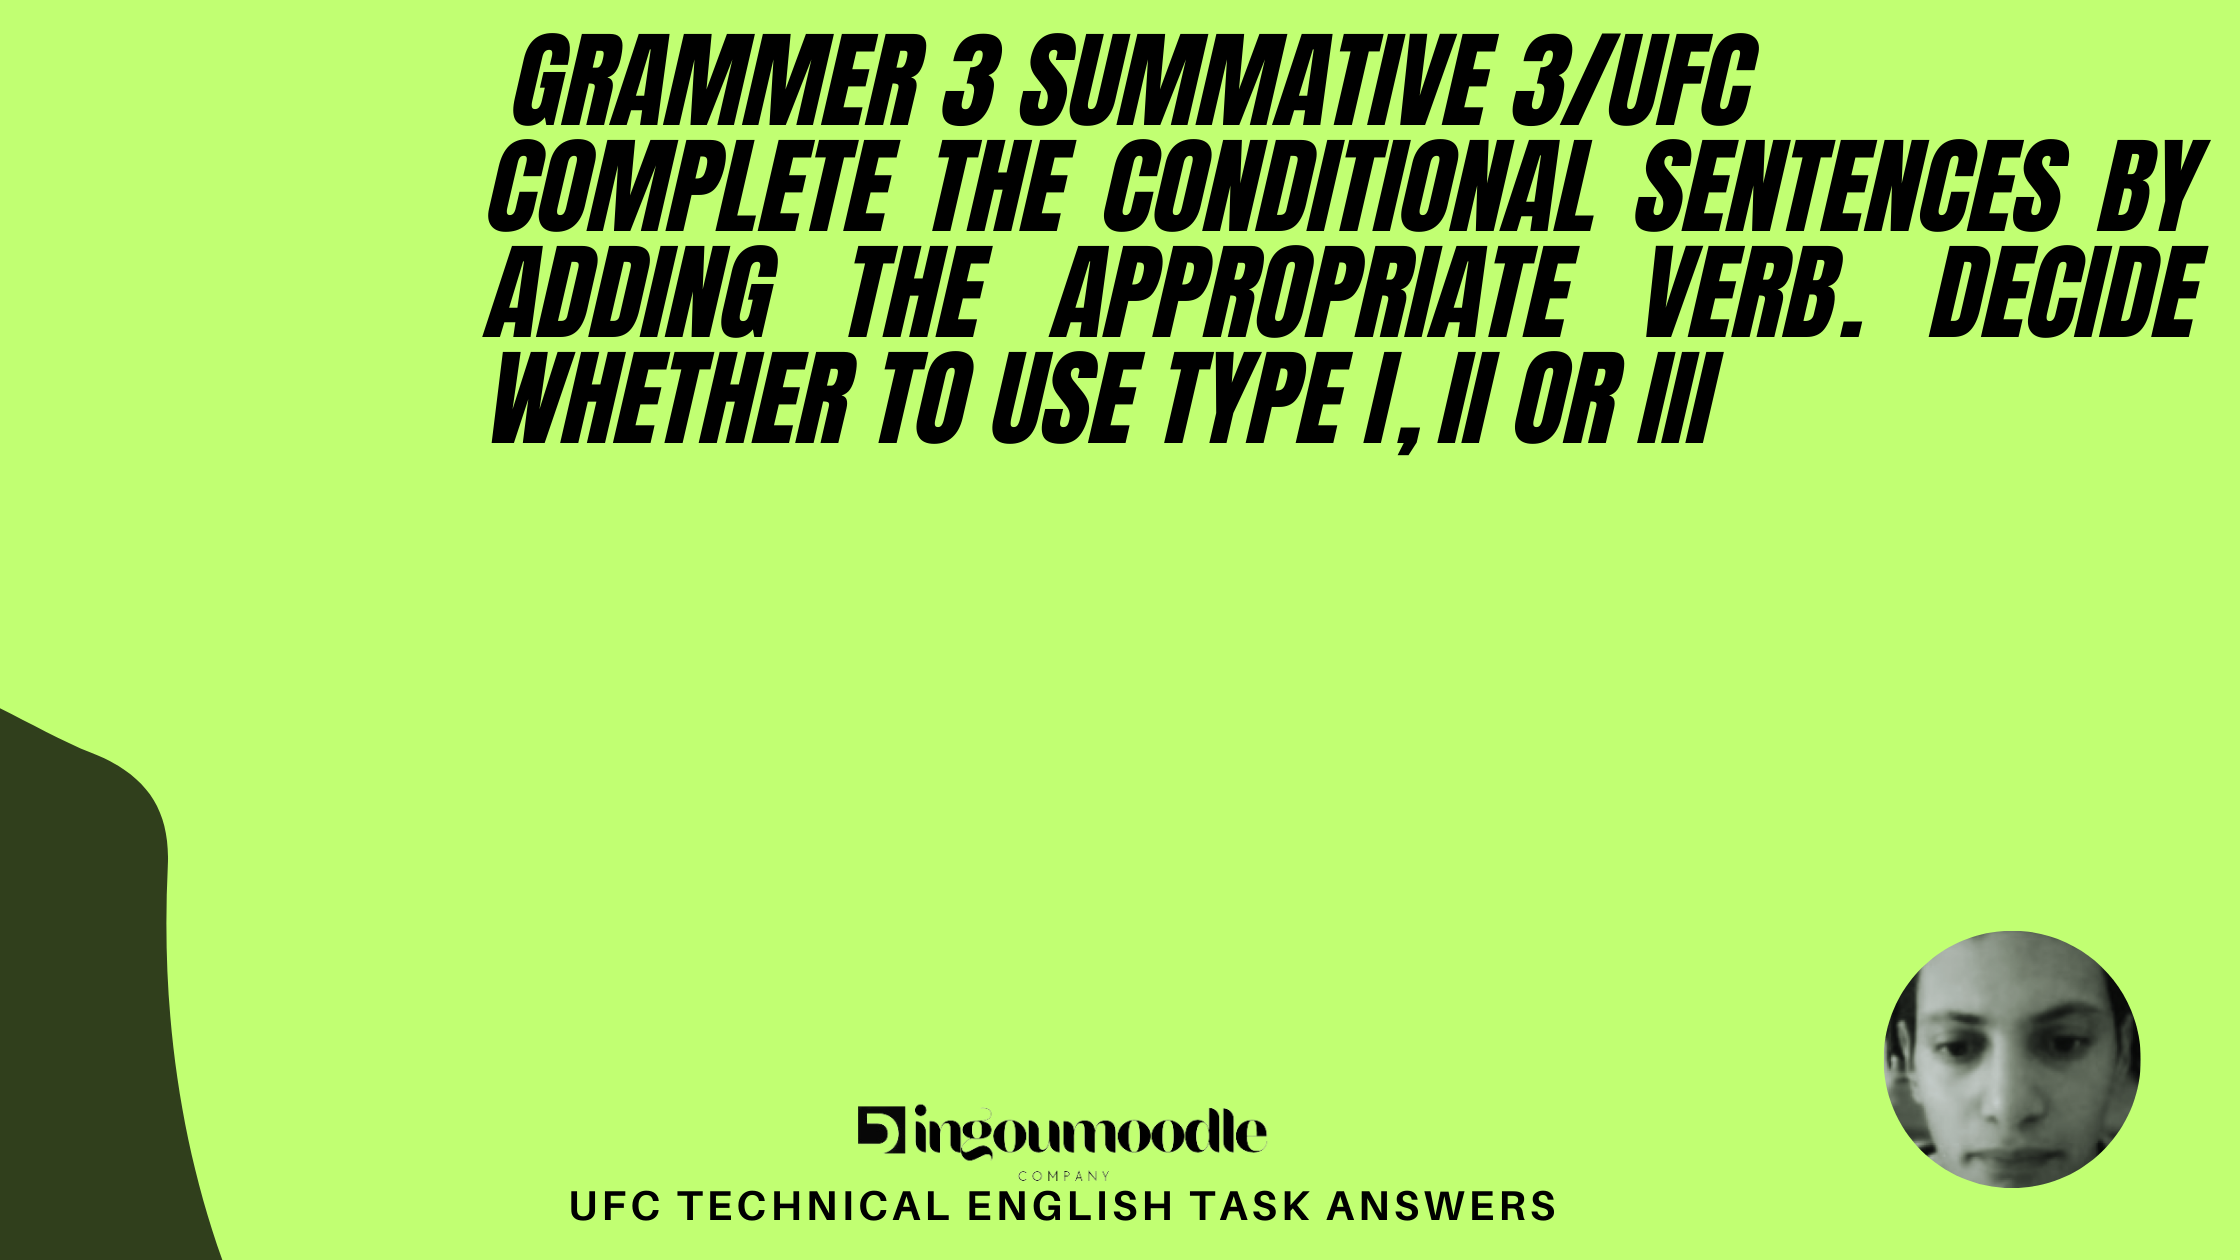 Grammar 3 Summative 3/UFC Complete the Conditional Sentences by adding the appropriate verb. Decide whether to use Type I, II or III